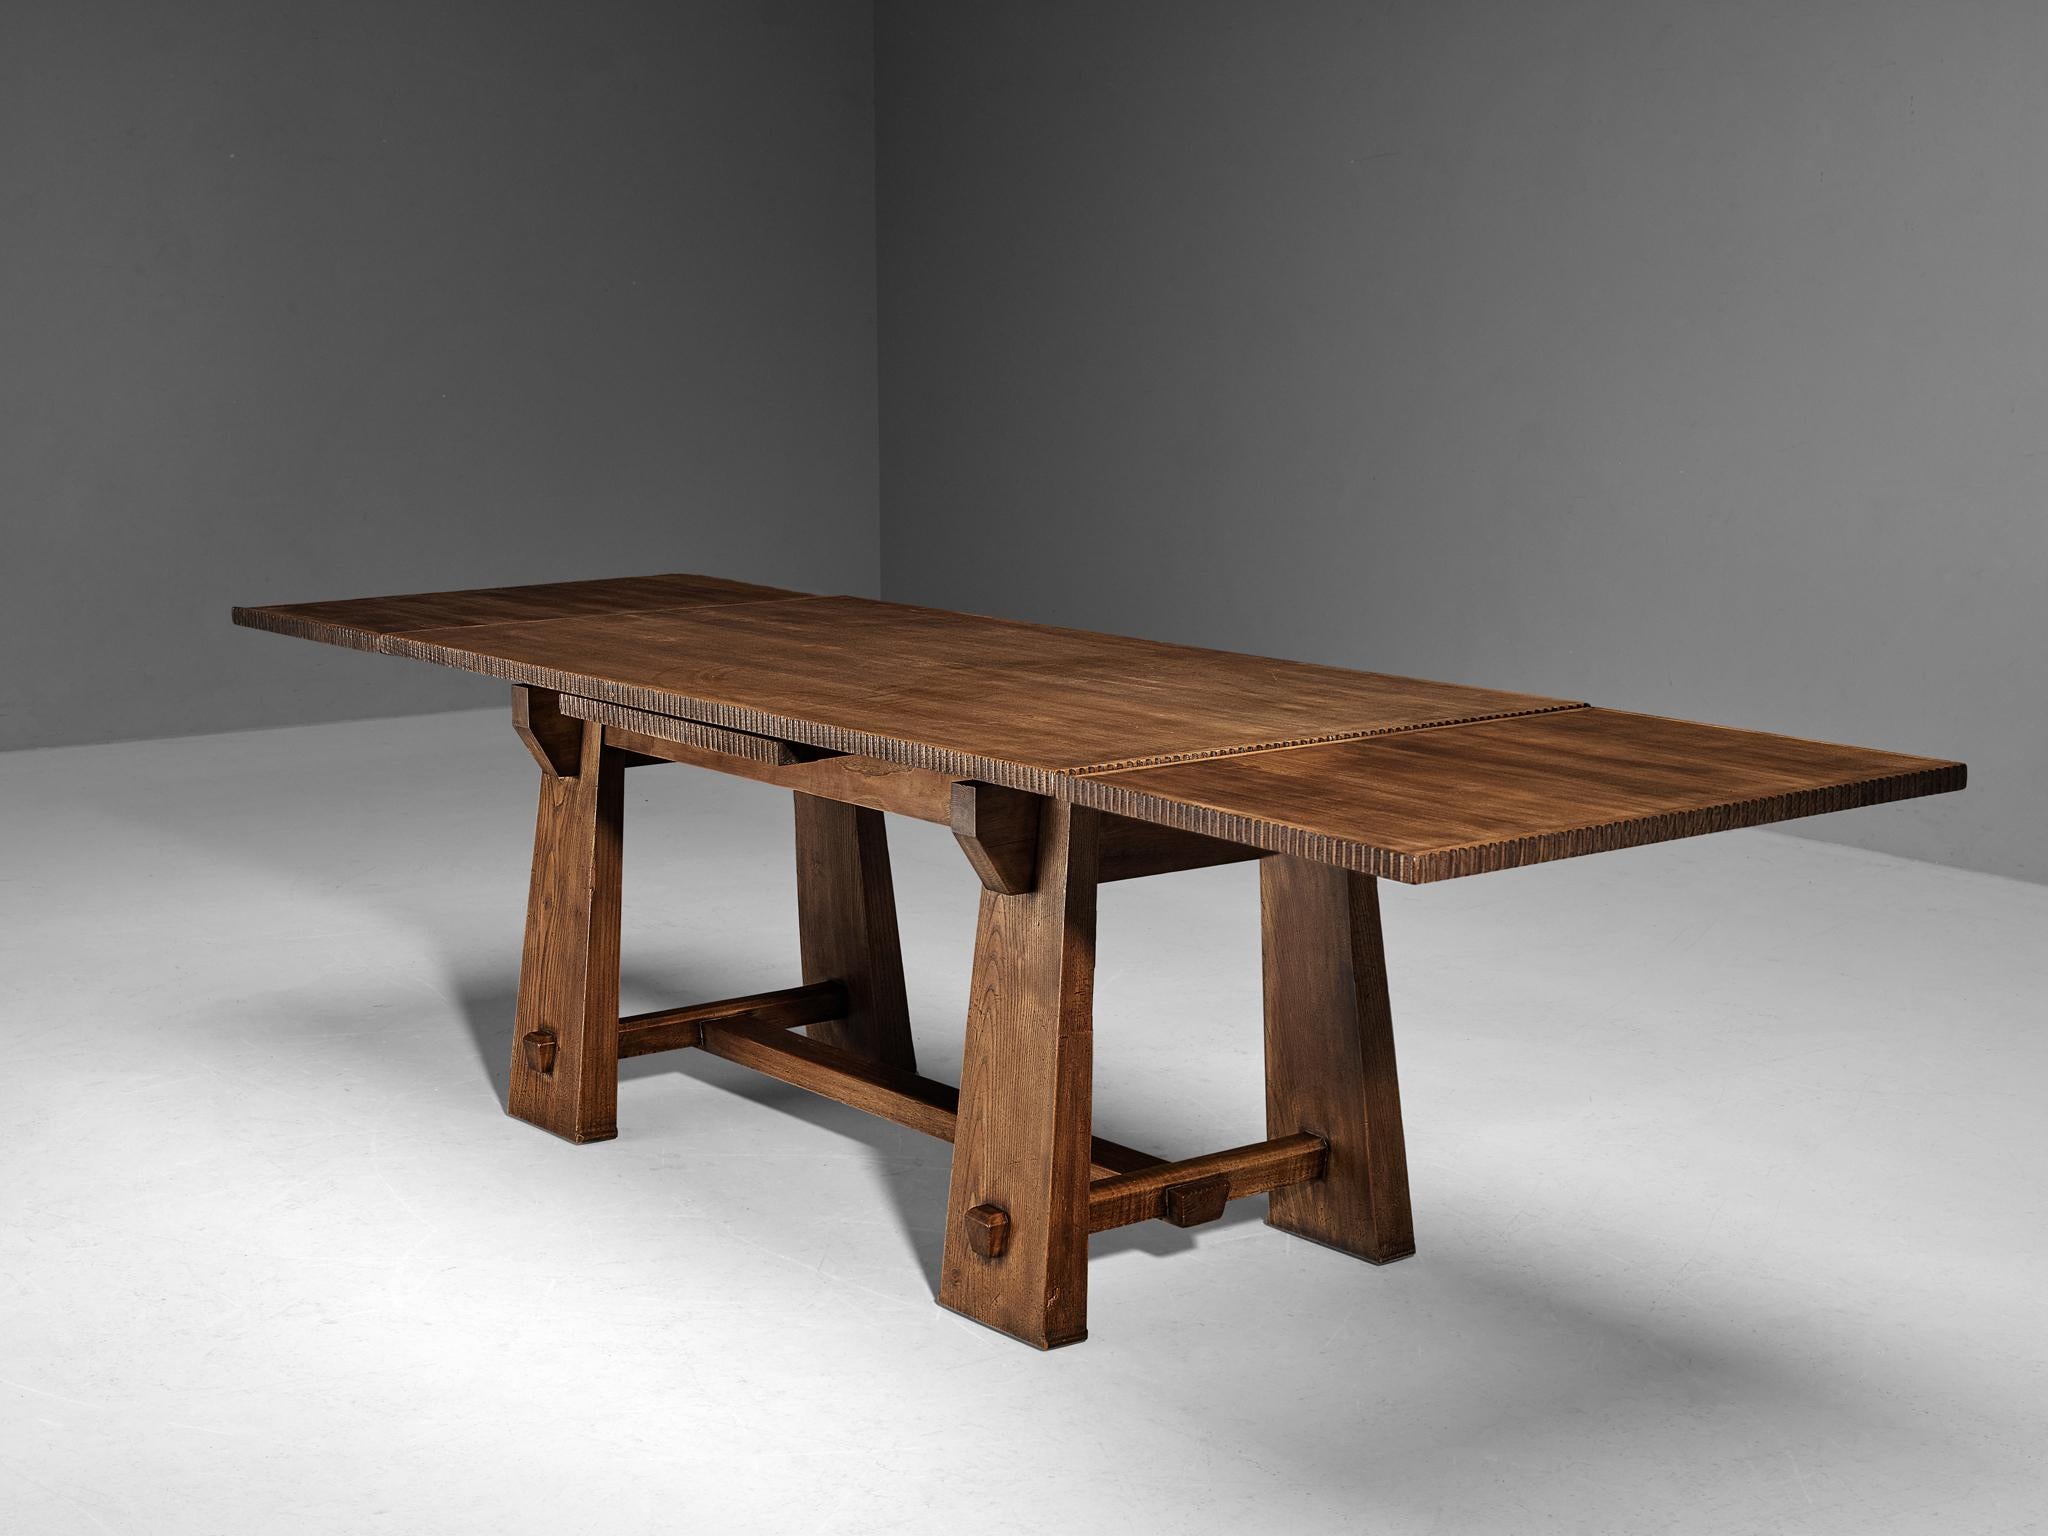 Ernesto Valabrega, dining table, oak, Italy, circa 1935 

Ernesto Valabrega once again proves his great eye for materialization and great craftsmanship this dining table is exemplary for. The table is architecturally built based on the assemblage of